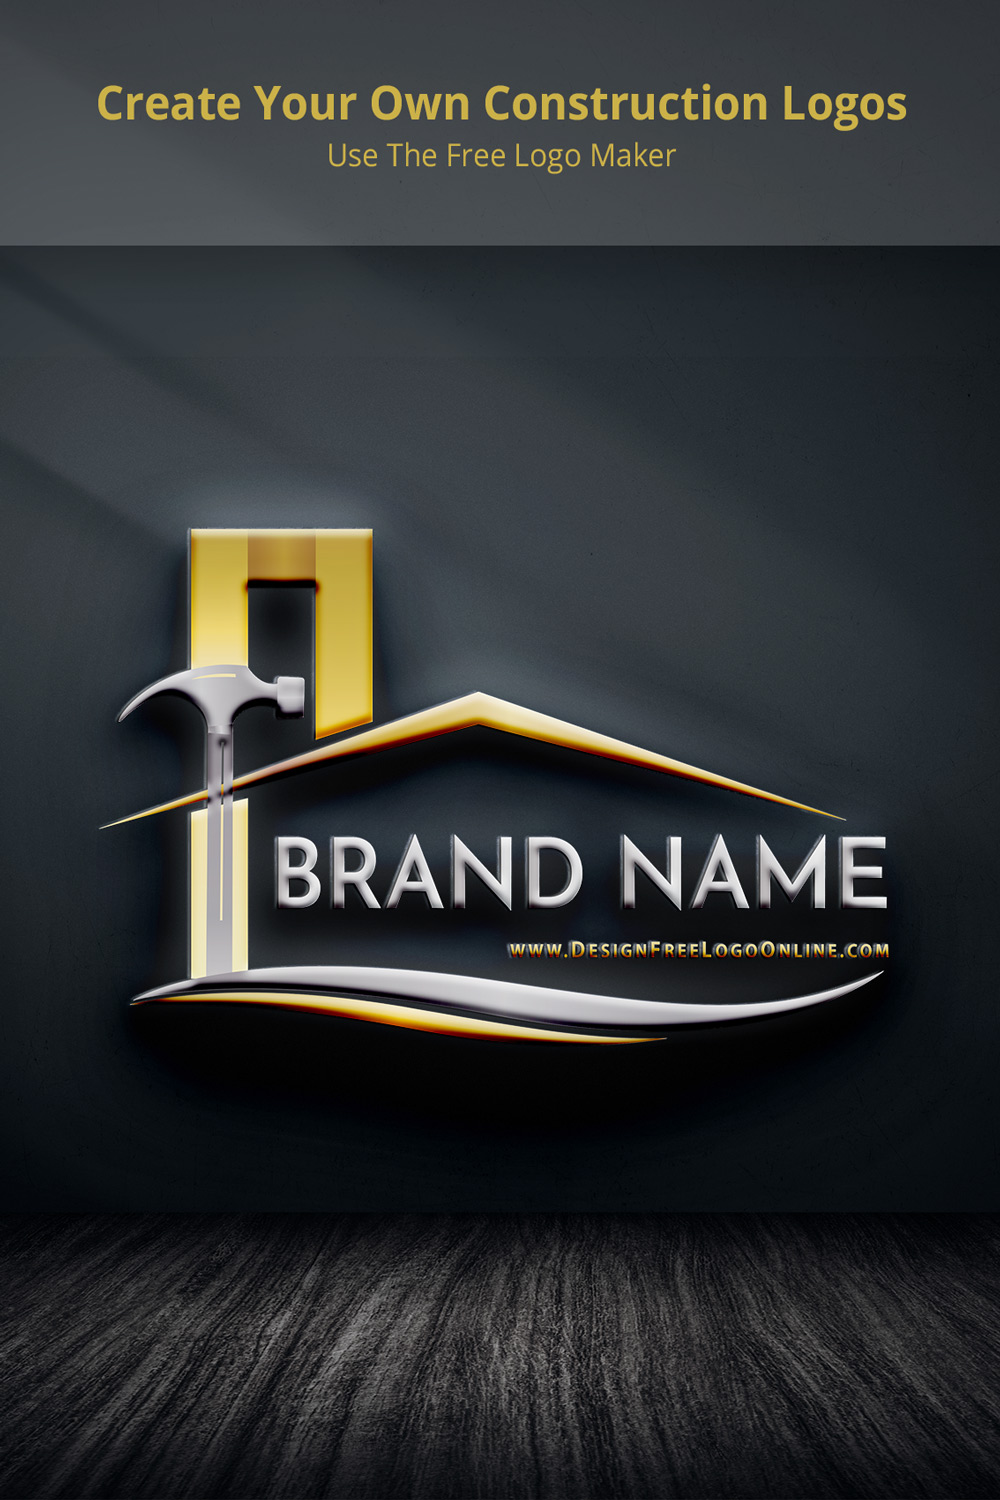 Create Your Own Construction Logos
Use The Free Logo Maker

    

BRAND NAME

www DECIENEREE]L NGADNLINE COM